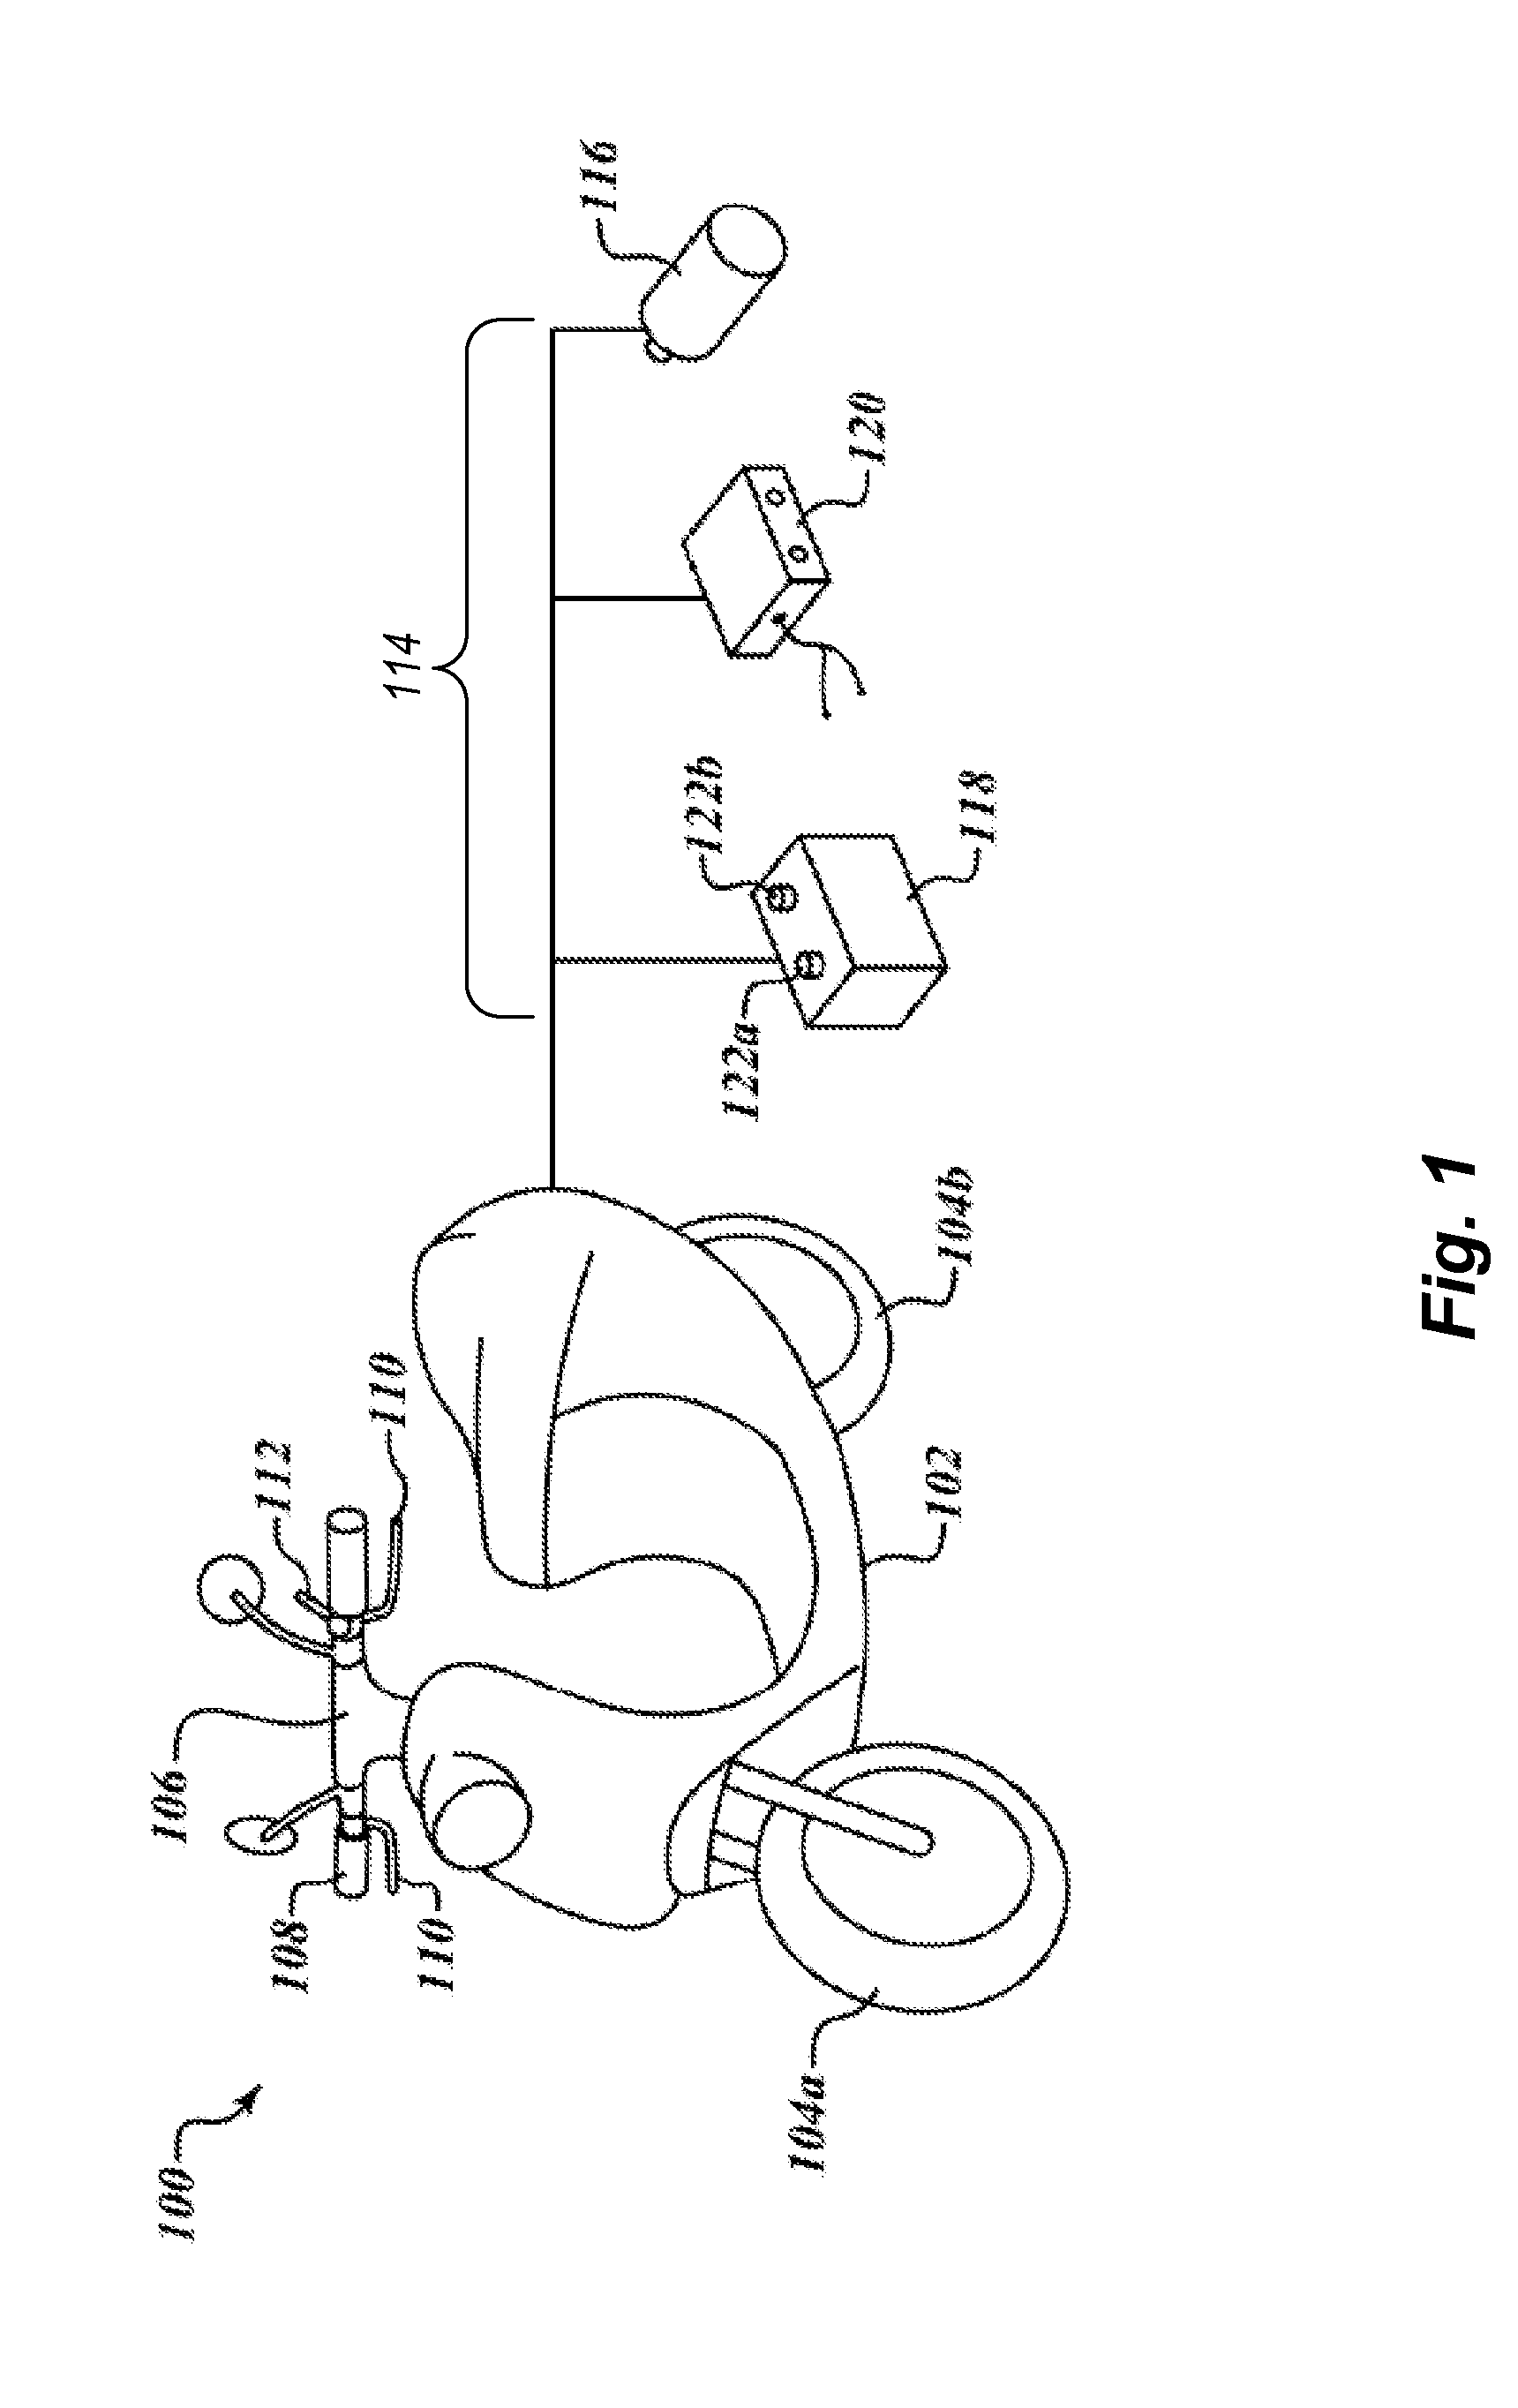 Battery configuration for an electric vehicle